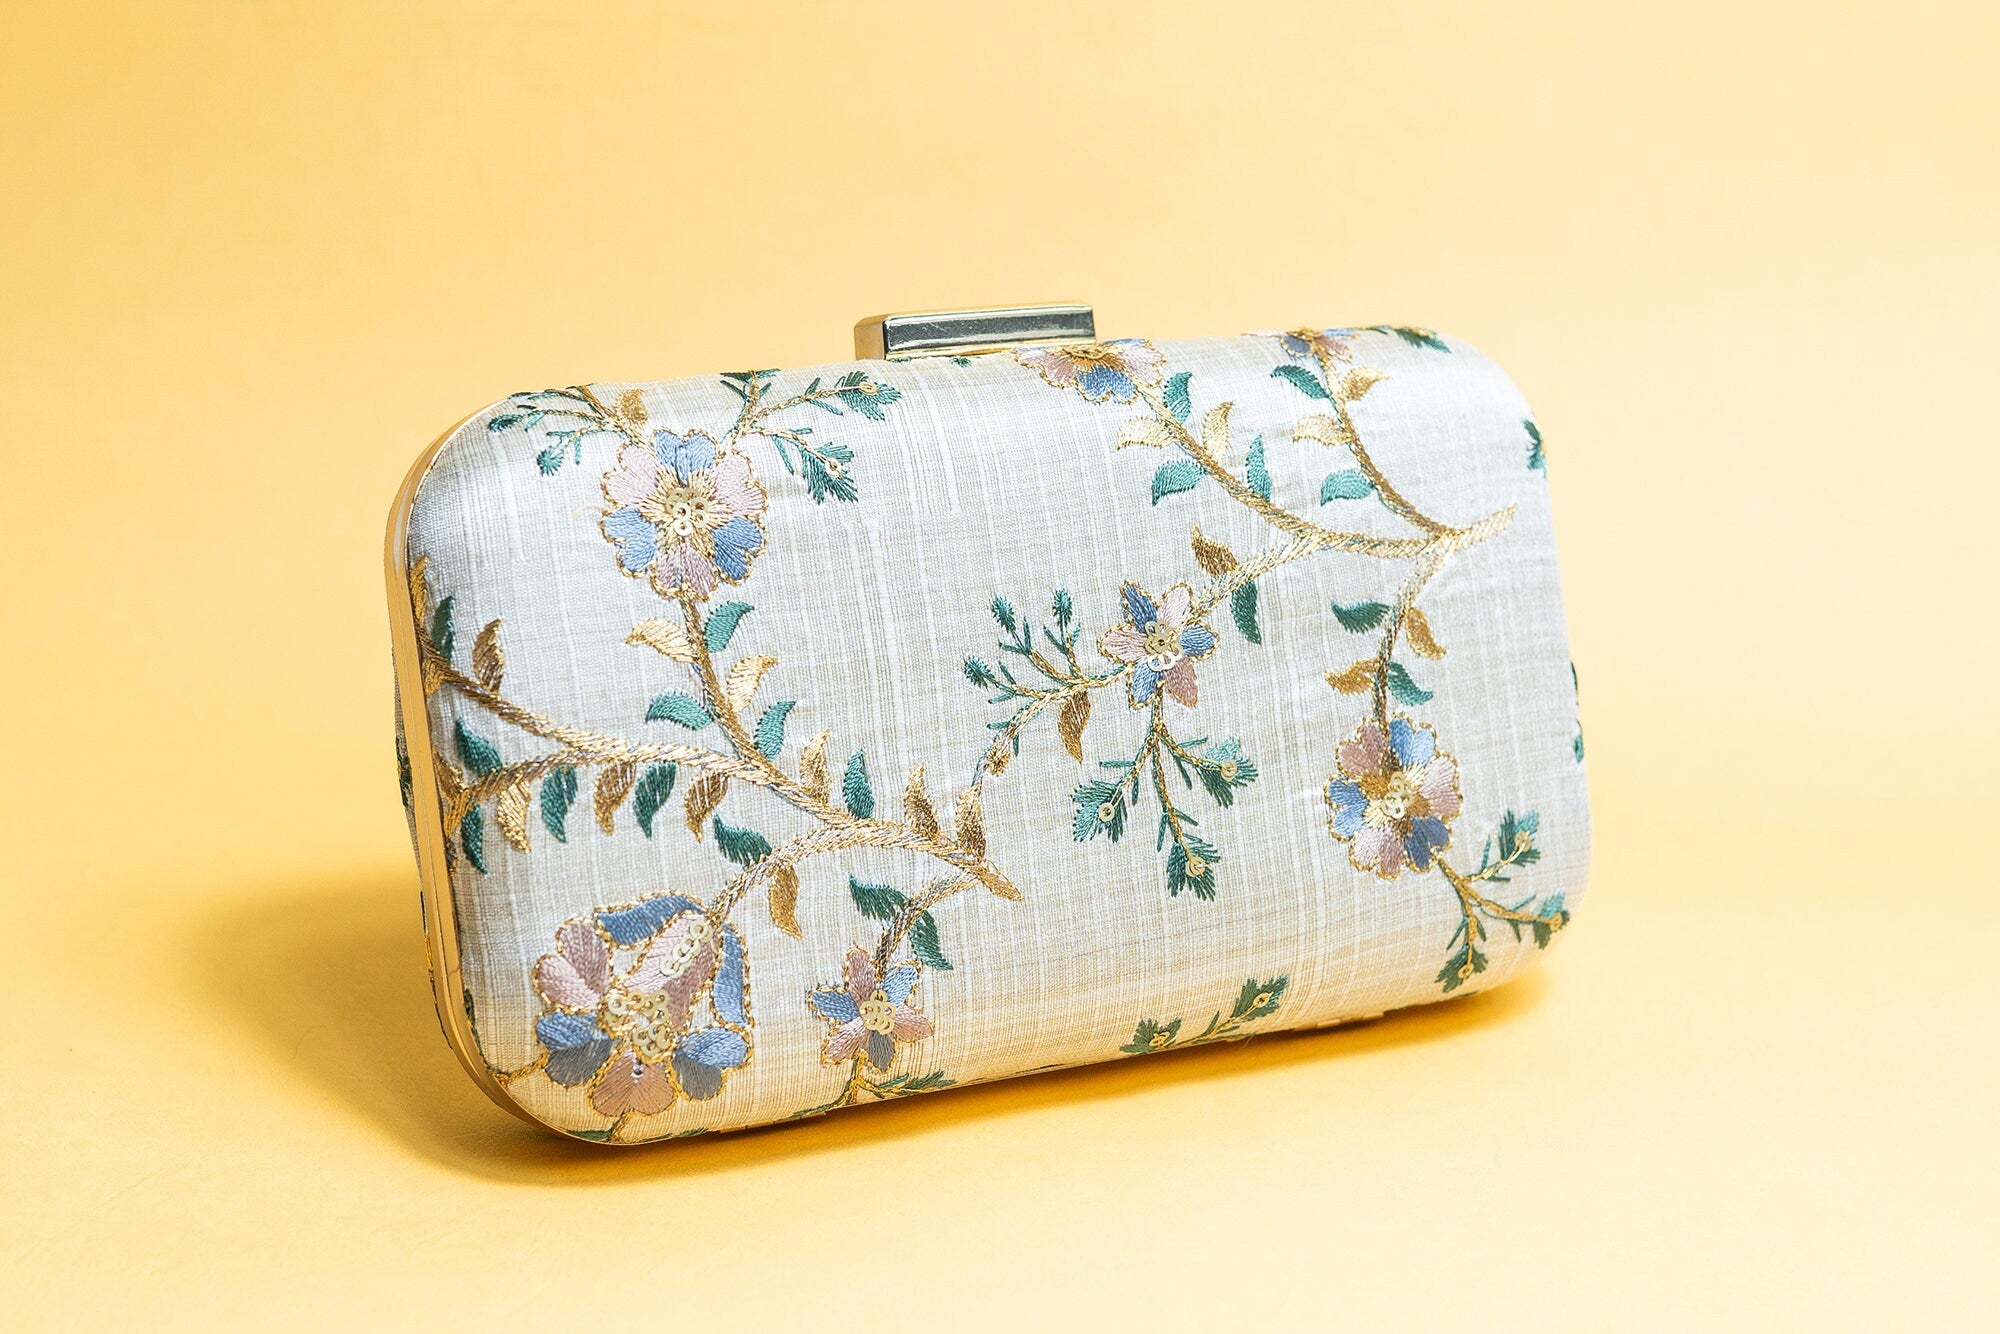 Pastel silk clutch purse/bag, hand made embroidery clutch bag with detachable metal sling